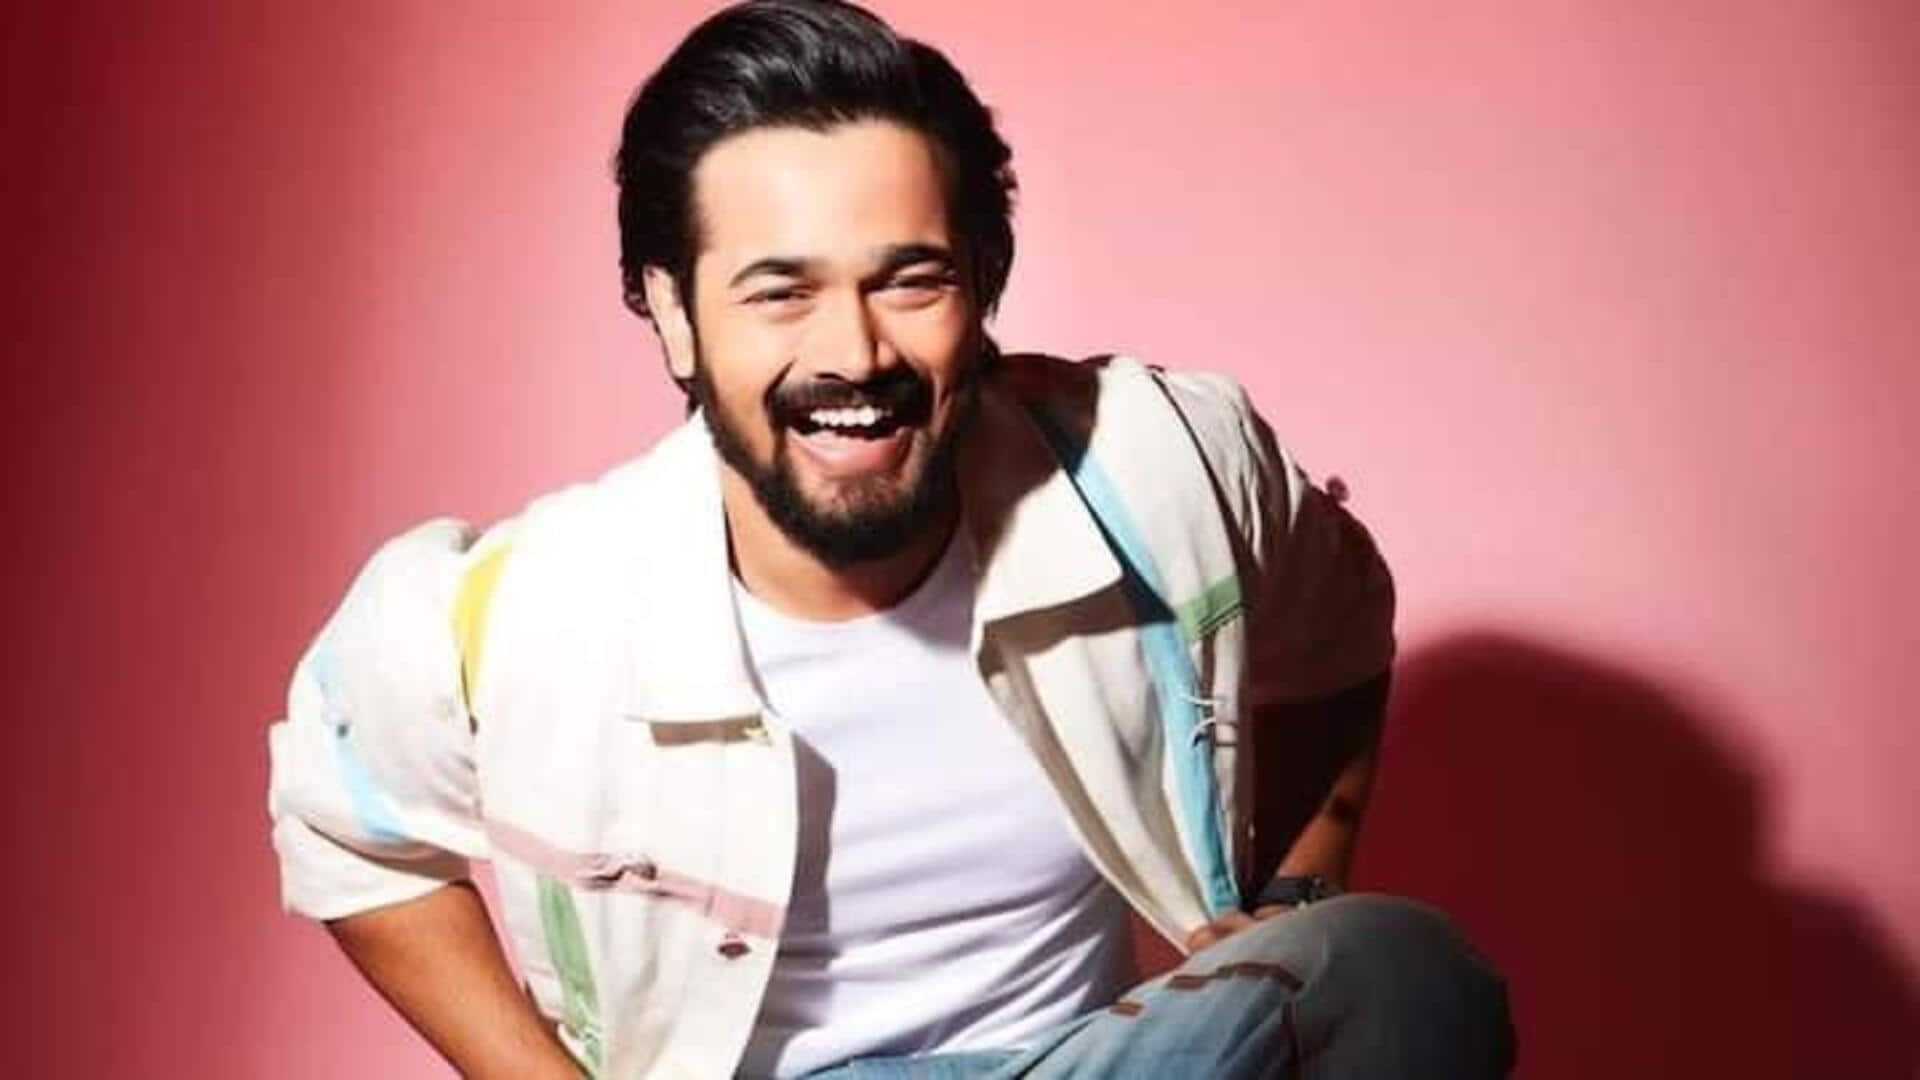 'Met with skepticism': Bhuvan Bam on YouTubers foraying into acting